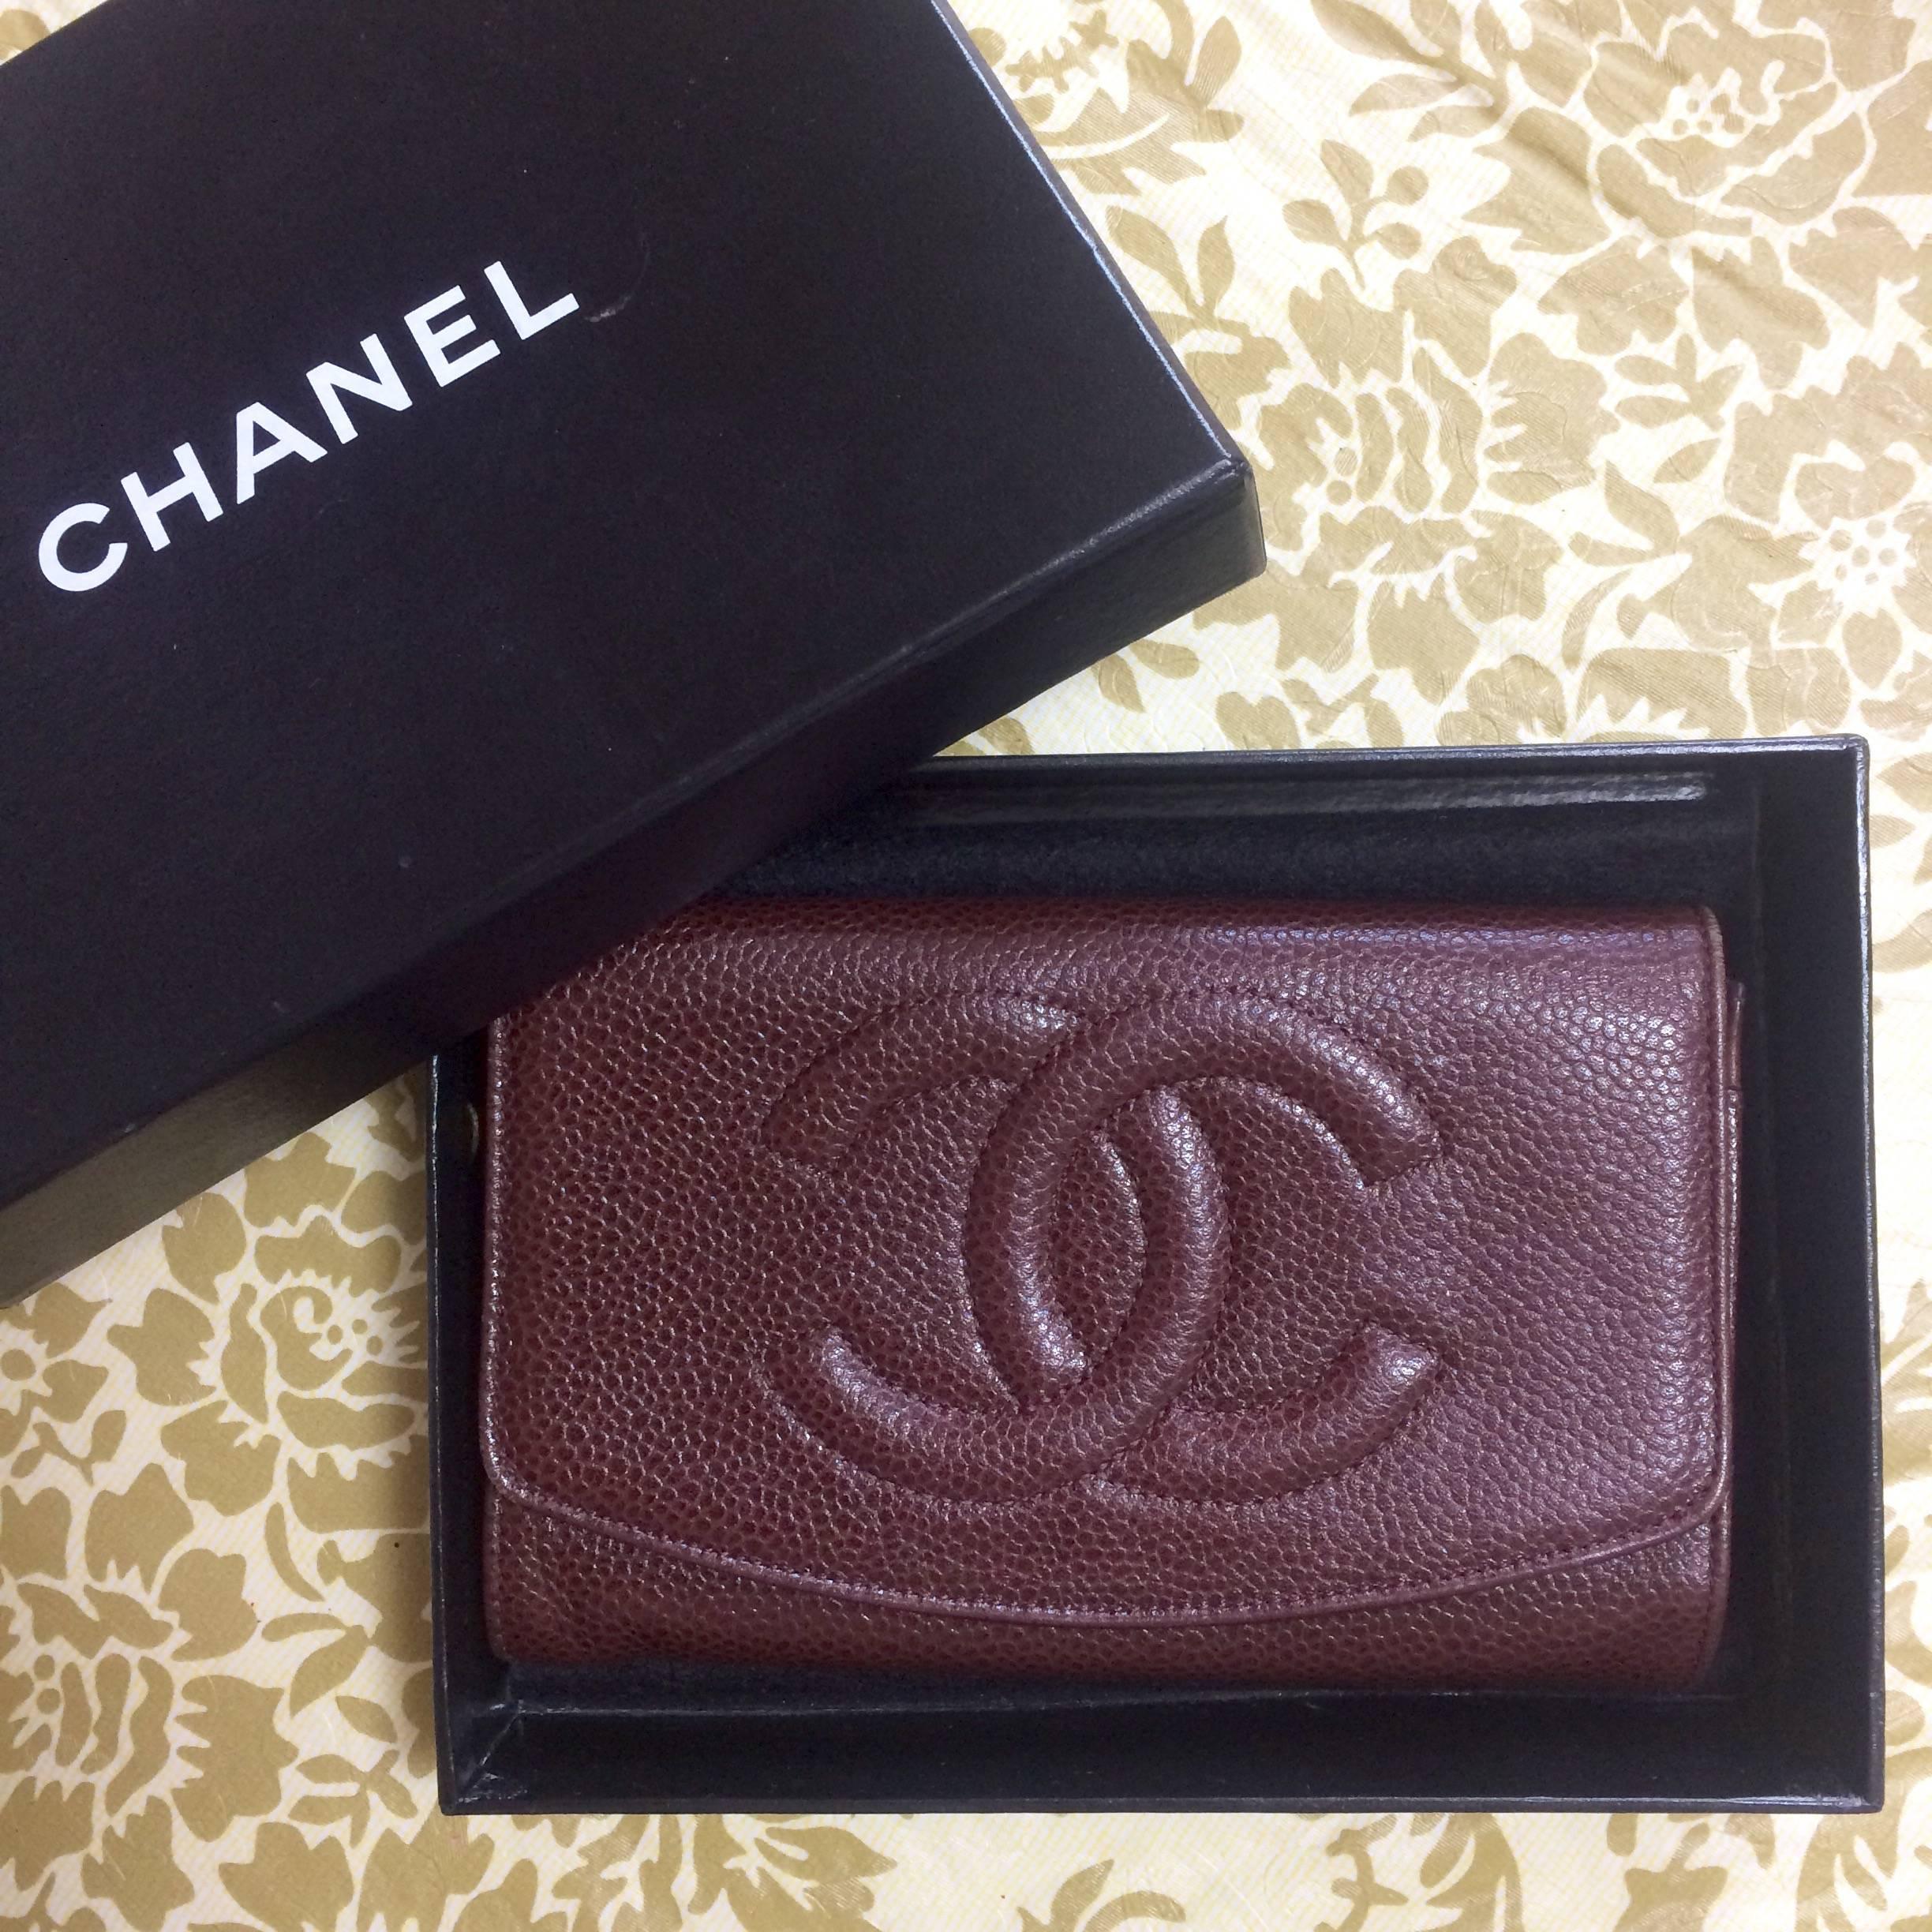 1990s. Vintage CHANEL brown caviar leather wallet with large CC stitch mark. Classic wallet for unisex use.

This is a CHANEL vintage classic wallet in brown caviar leather. 
Modest, simple and elegant piece for unisex use. It is something that